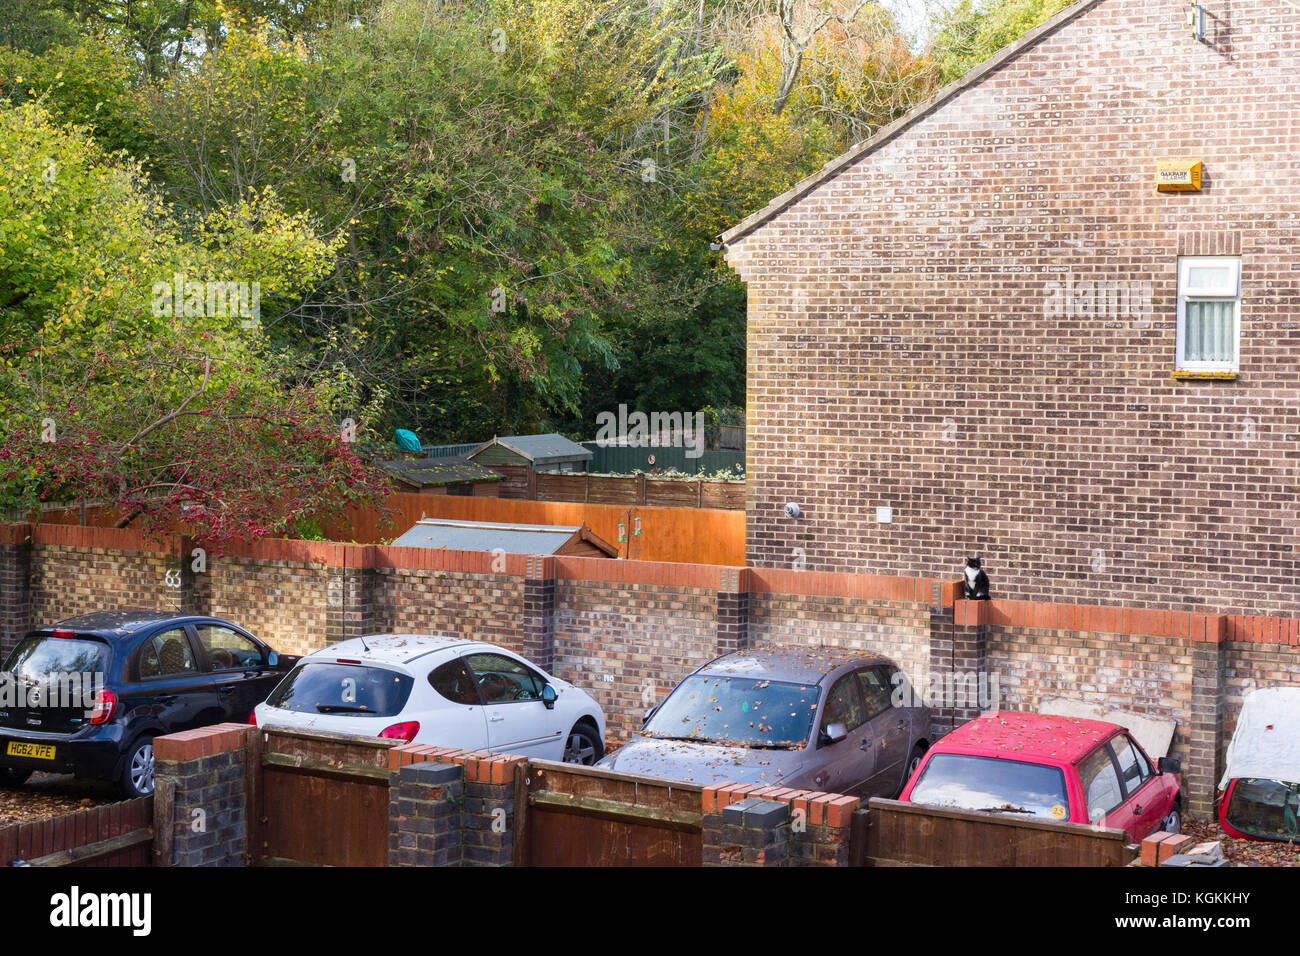 Cars parked in a private off road parking area in a residential suburban neighbourhood, Dorset, UK Stock Photo